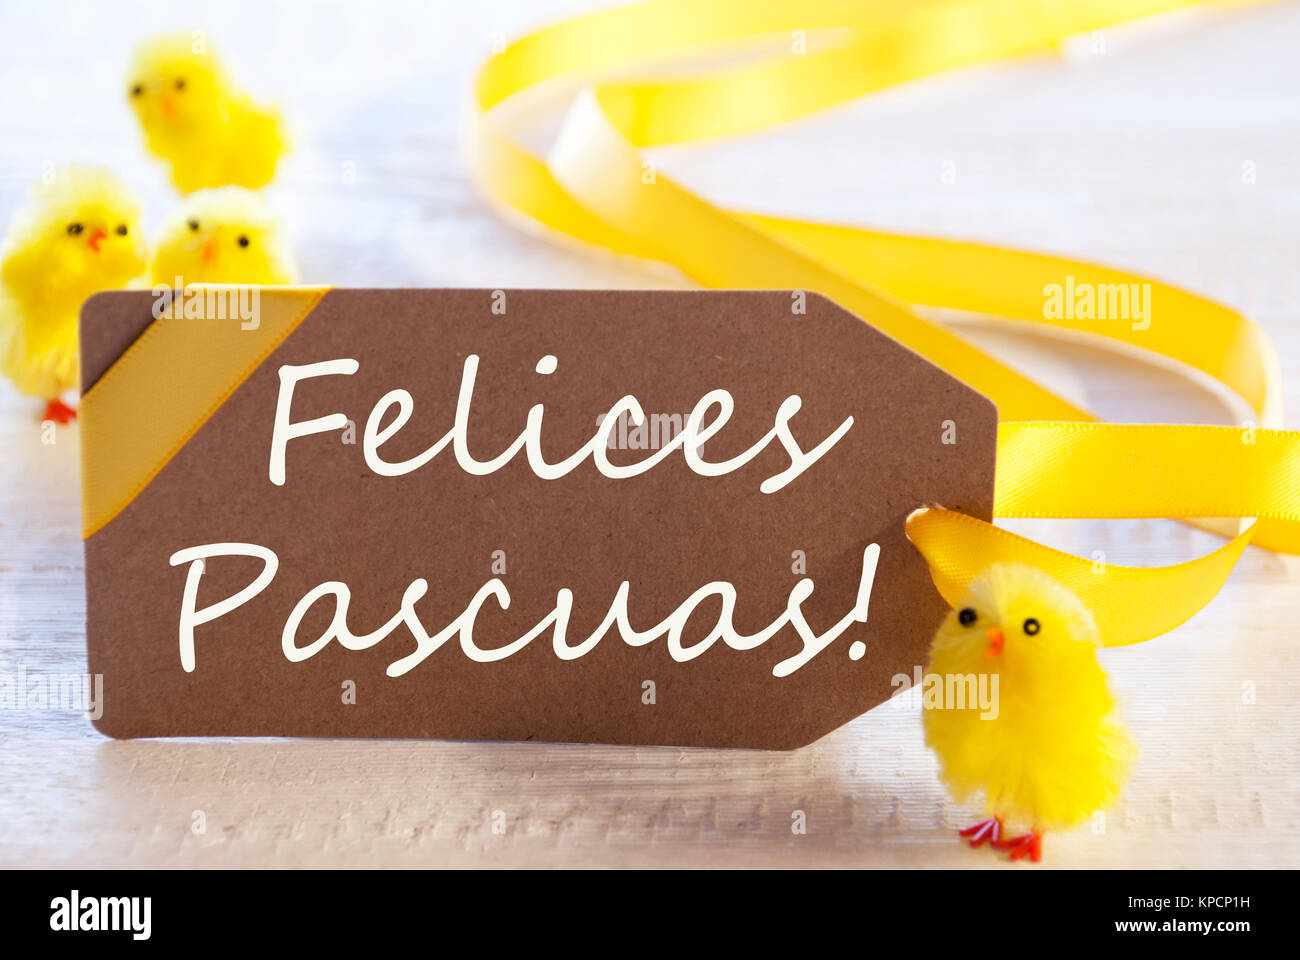 One Brown Label With Yellow Ribbon. Spanish Text Felices Pascuas Means Happy Easter. Card For Easter Greetings On Wooden Background Stock Photo